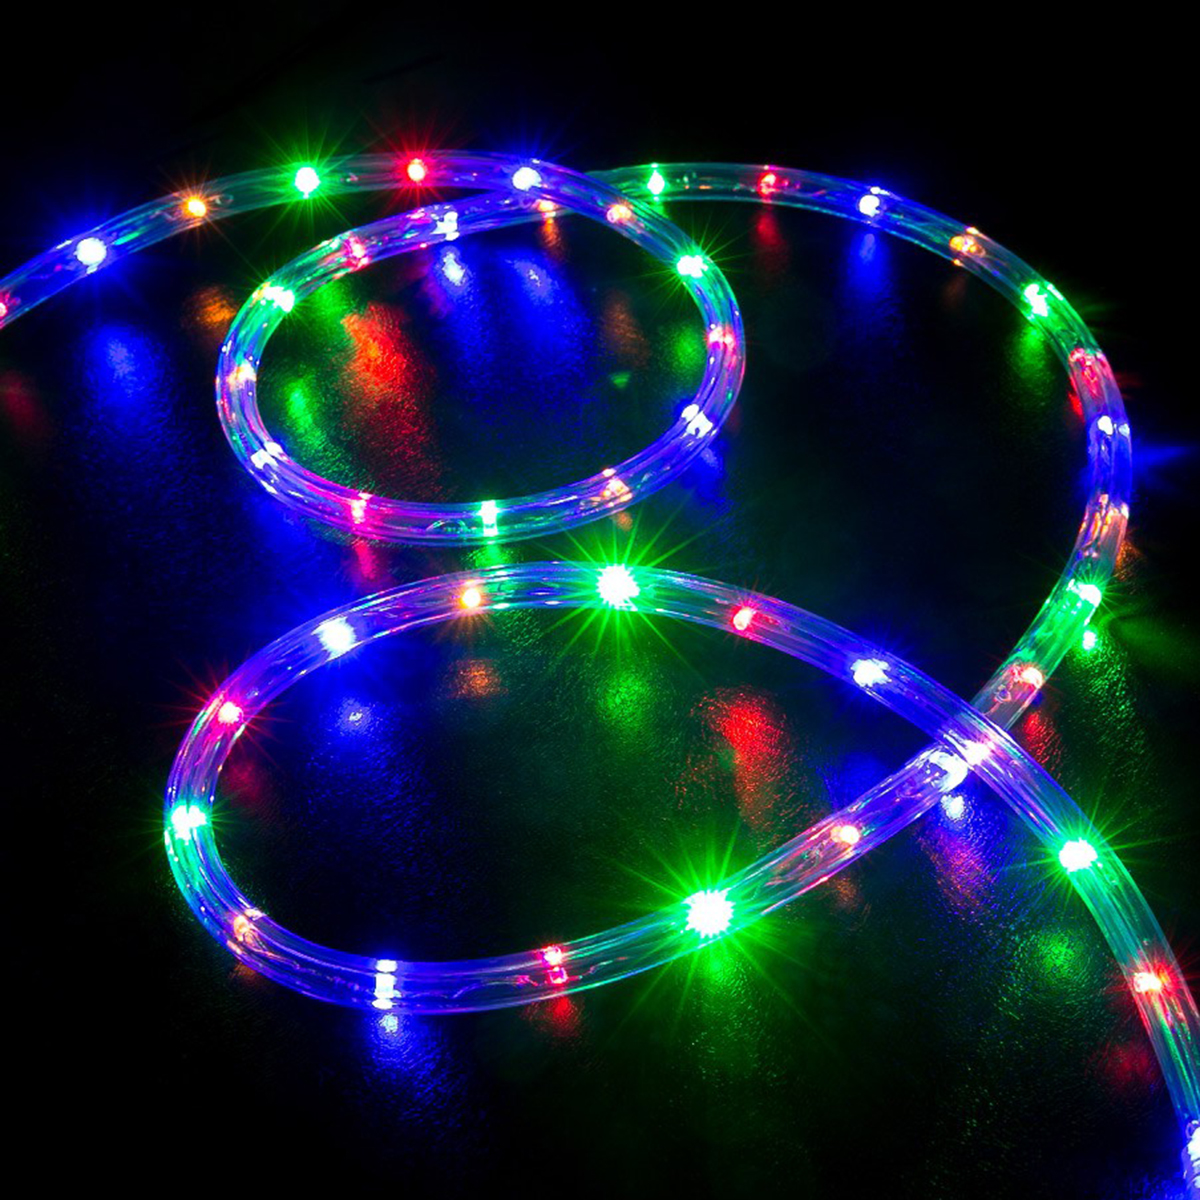 30 Ft LED Rope Fairy Light with Remote for Indoor/Outdoor Halloween Christmas Wedding Garden Patio Pool Decor 4 Modes Multi-Color - image 3 of 7